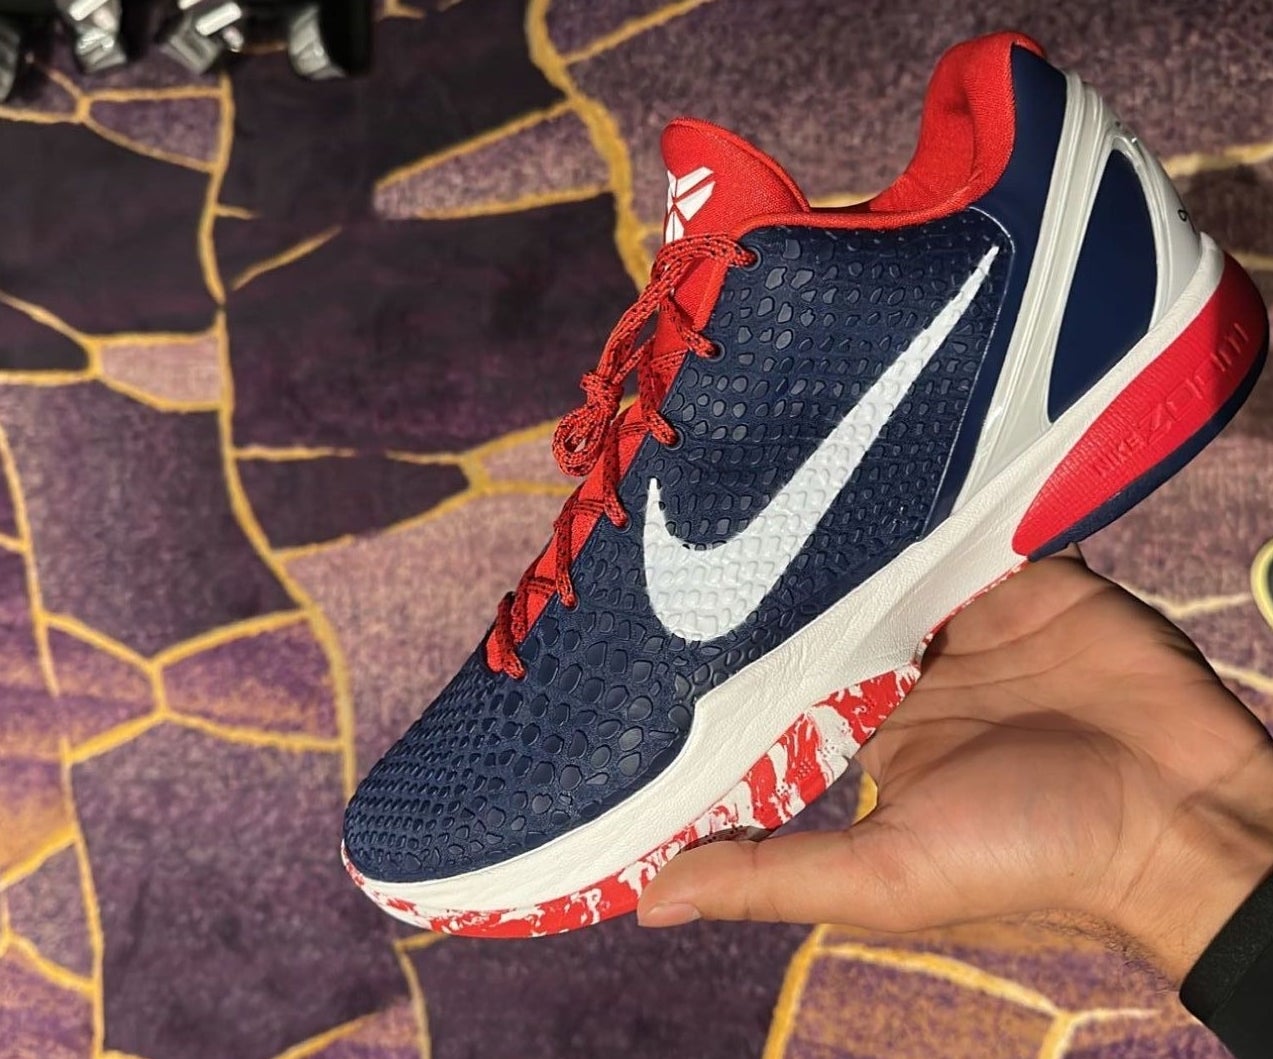 Knicks' Quentin Grimes shows first look at Nike Kobe 6 Team USA colorway